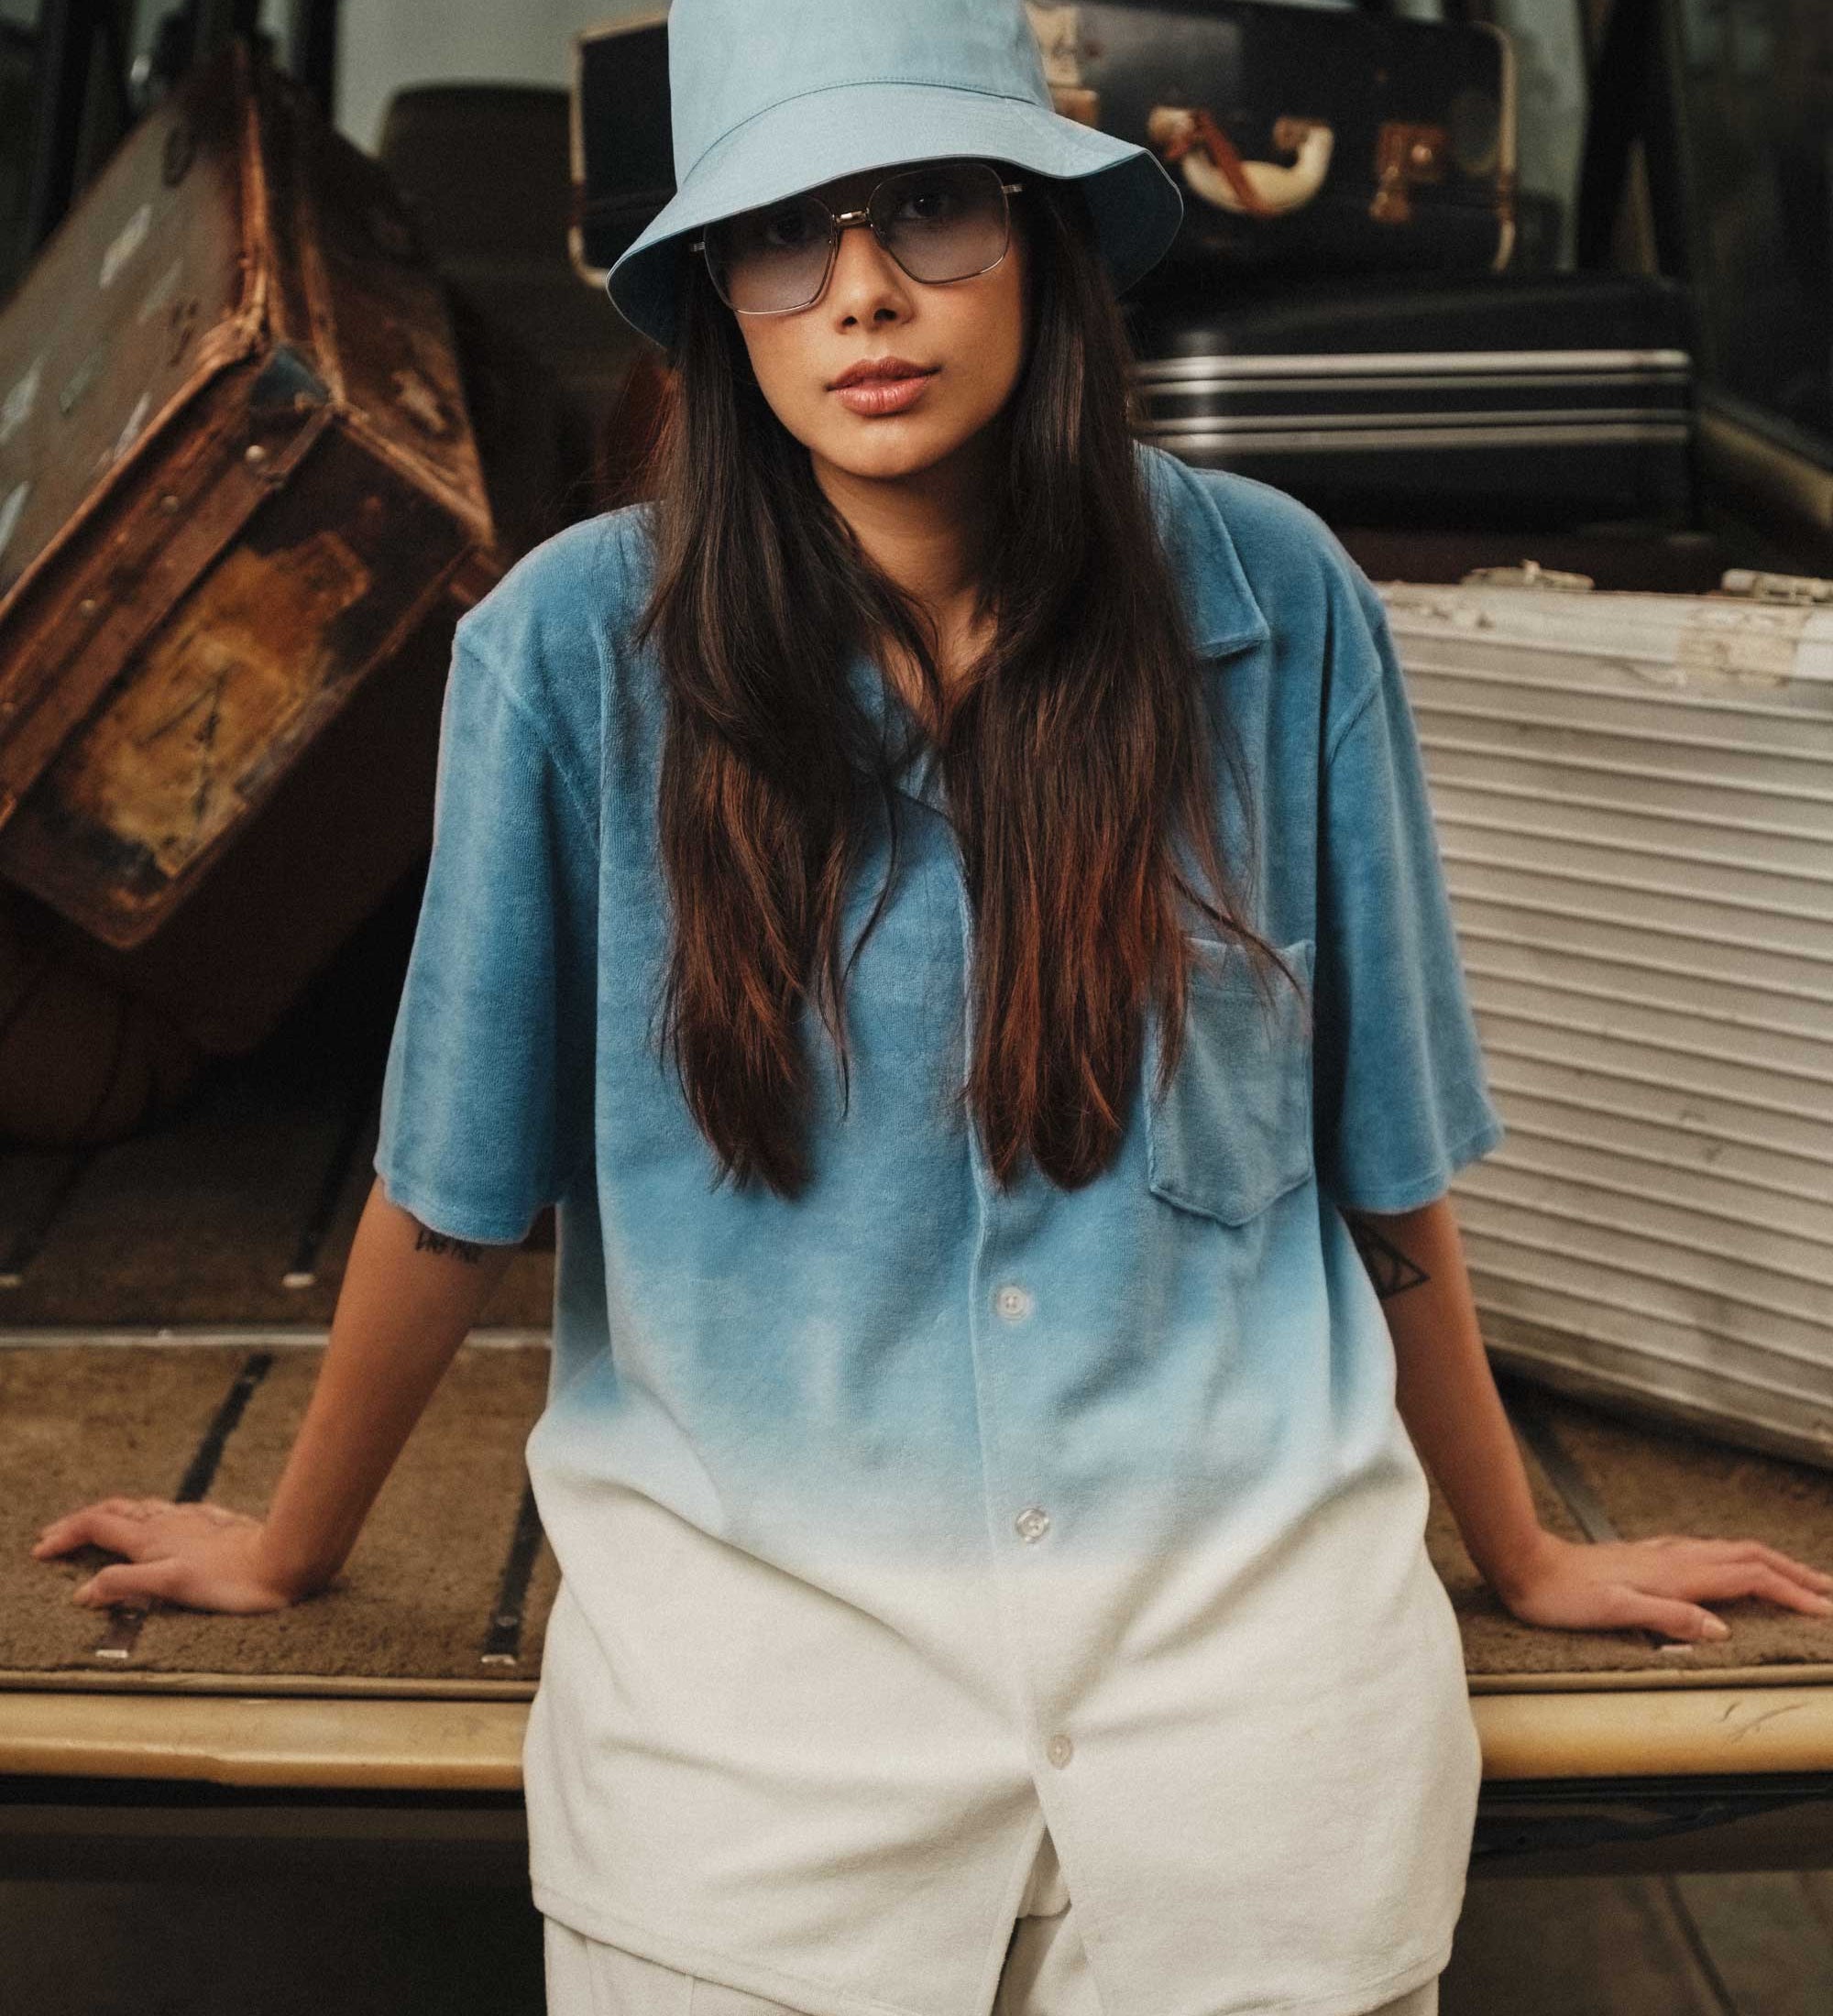 Female women wearing a white and sky blue short sleeve shirt with white button closure and one chest pocket